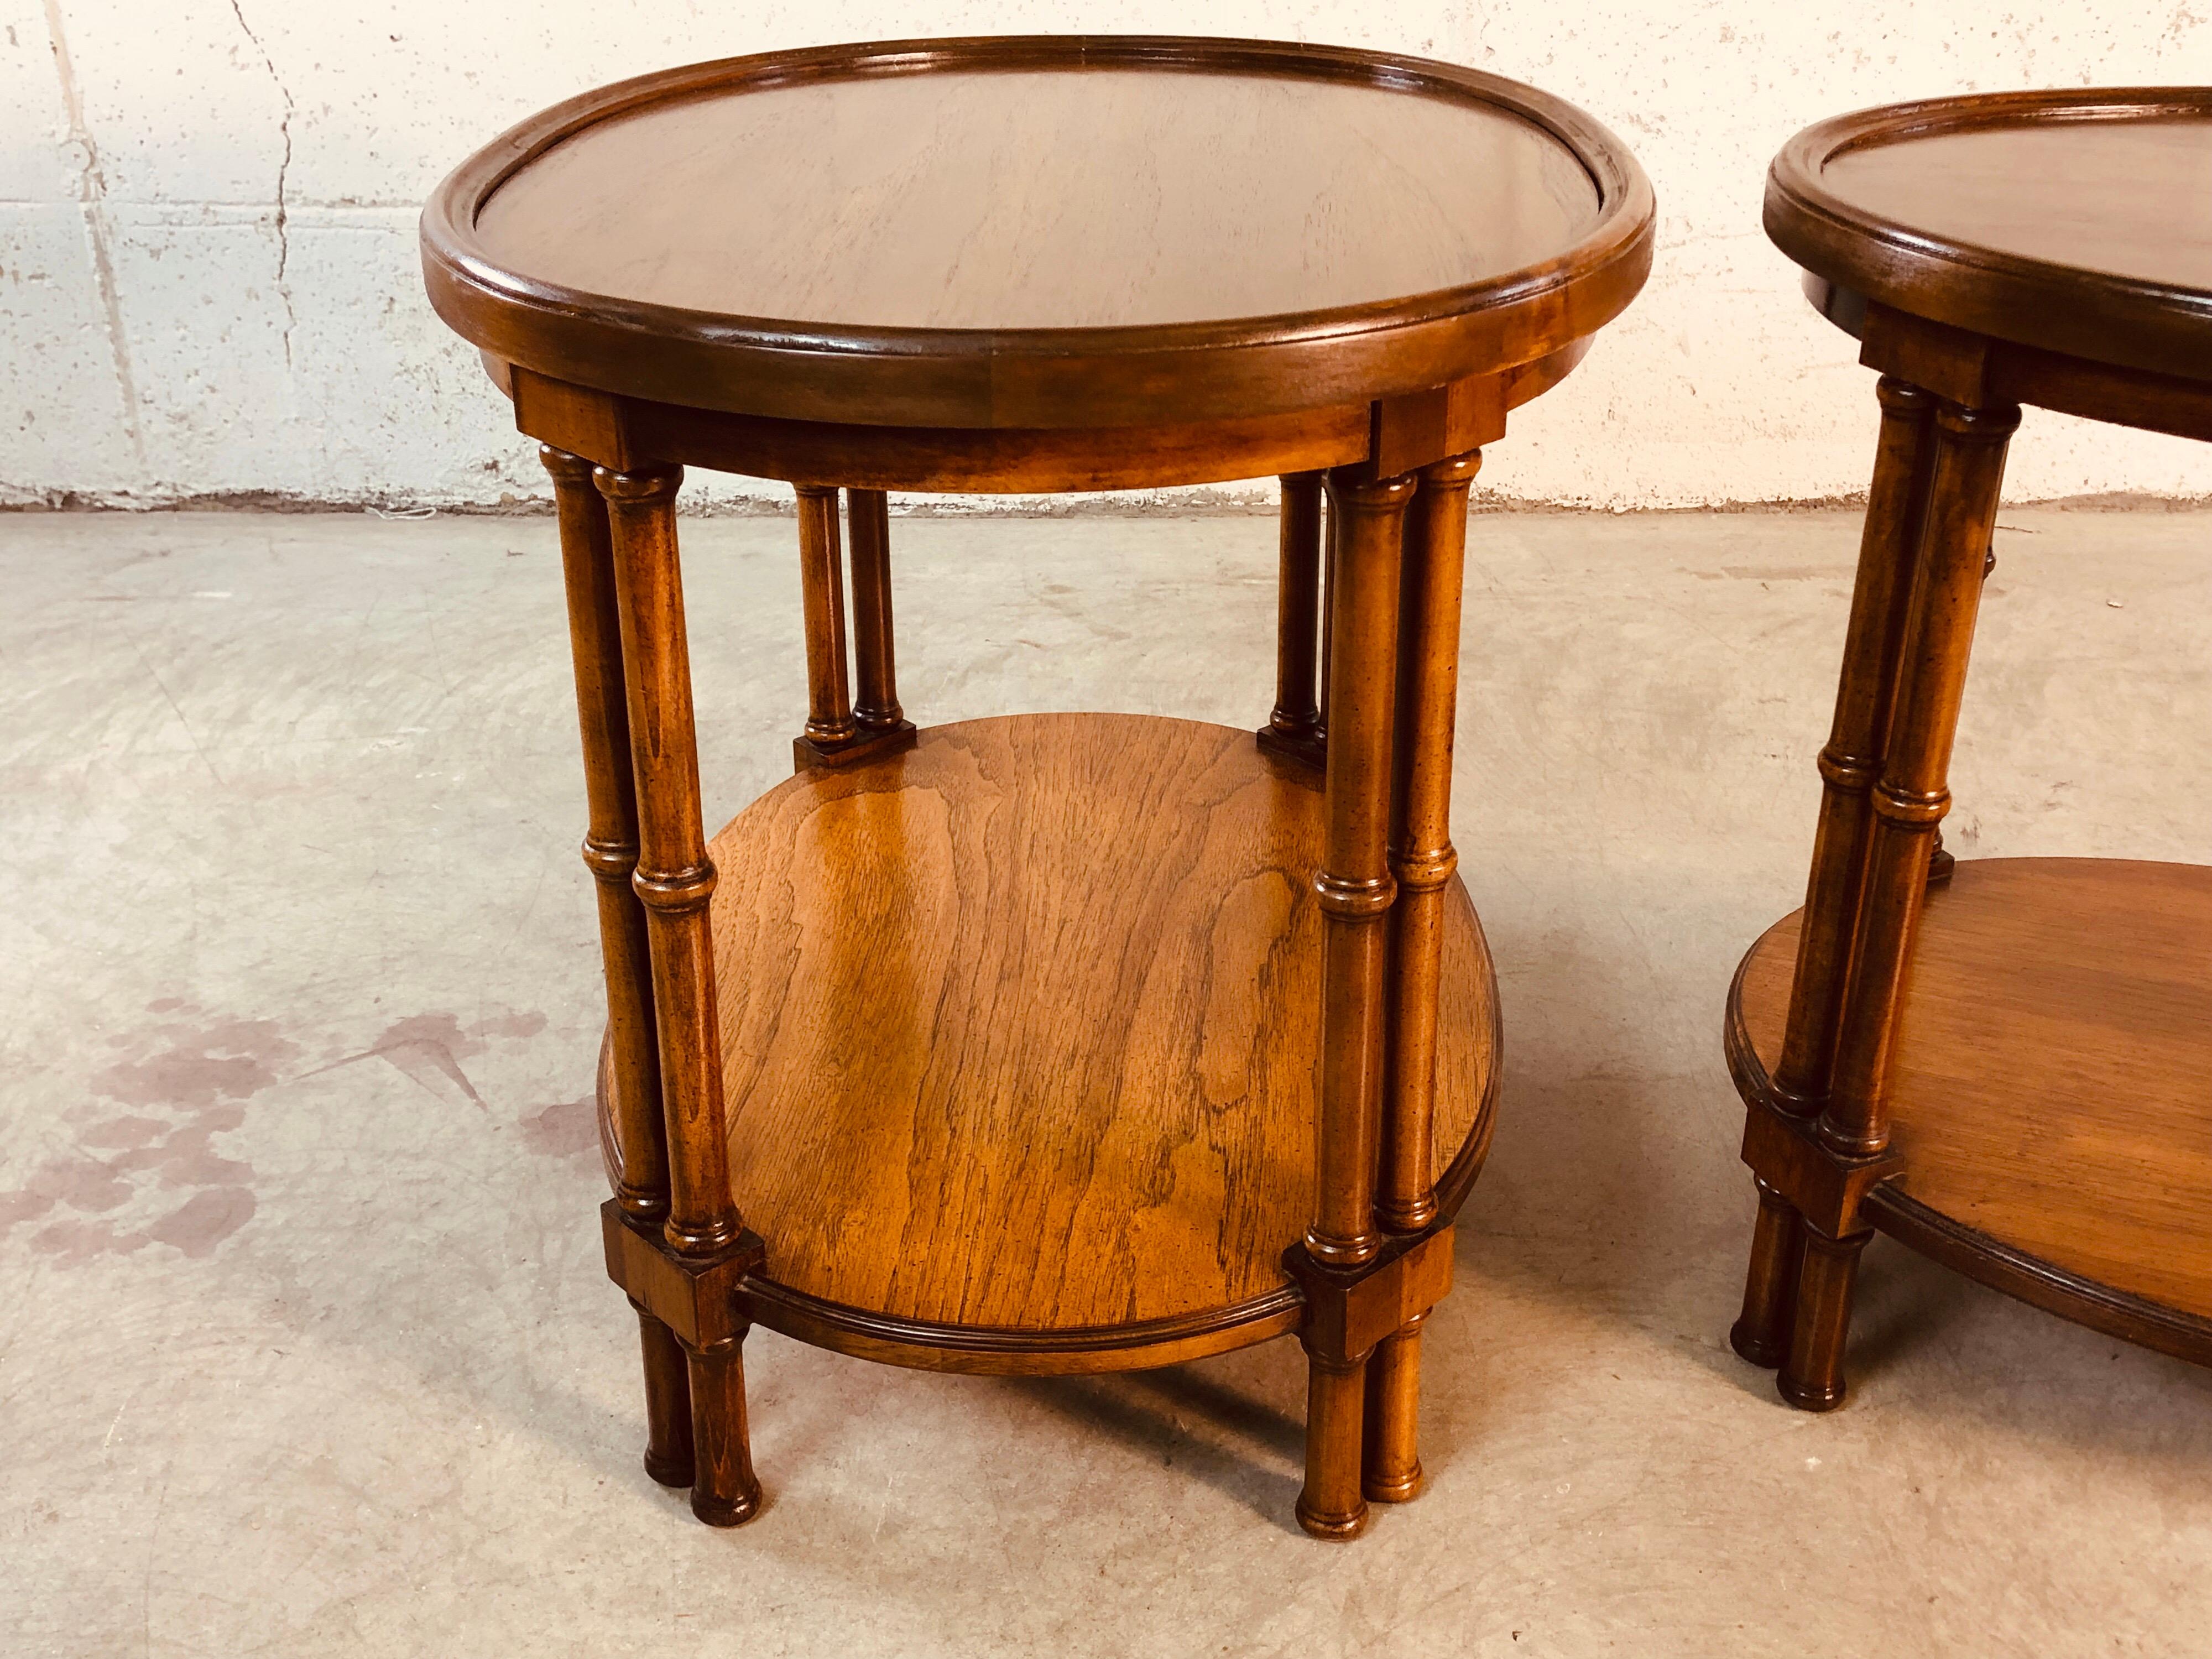 1960s Oval Mahogany Bamboo Style Brandt Furniture Side Tables, Pair For Sale 1